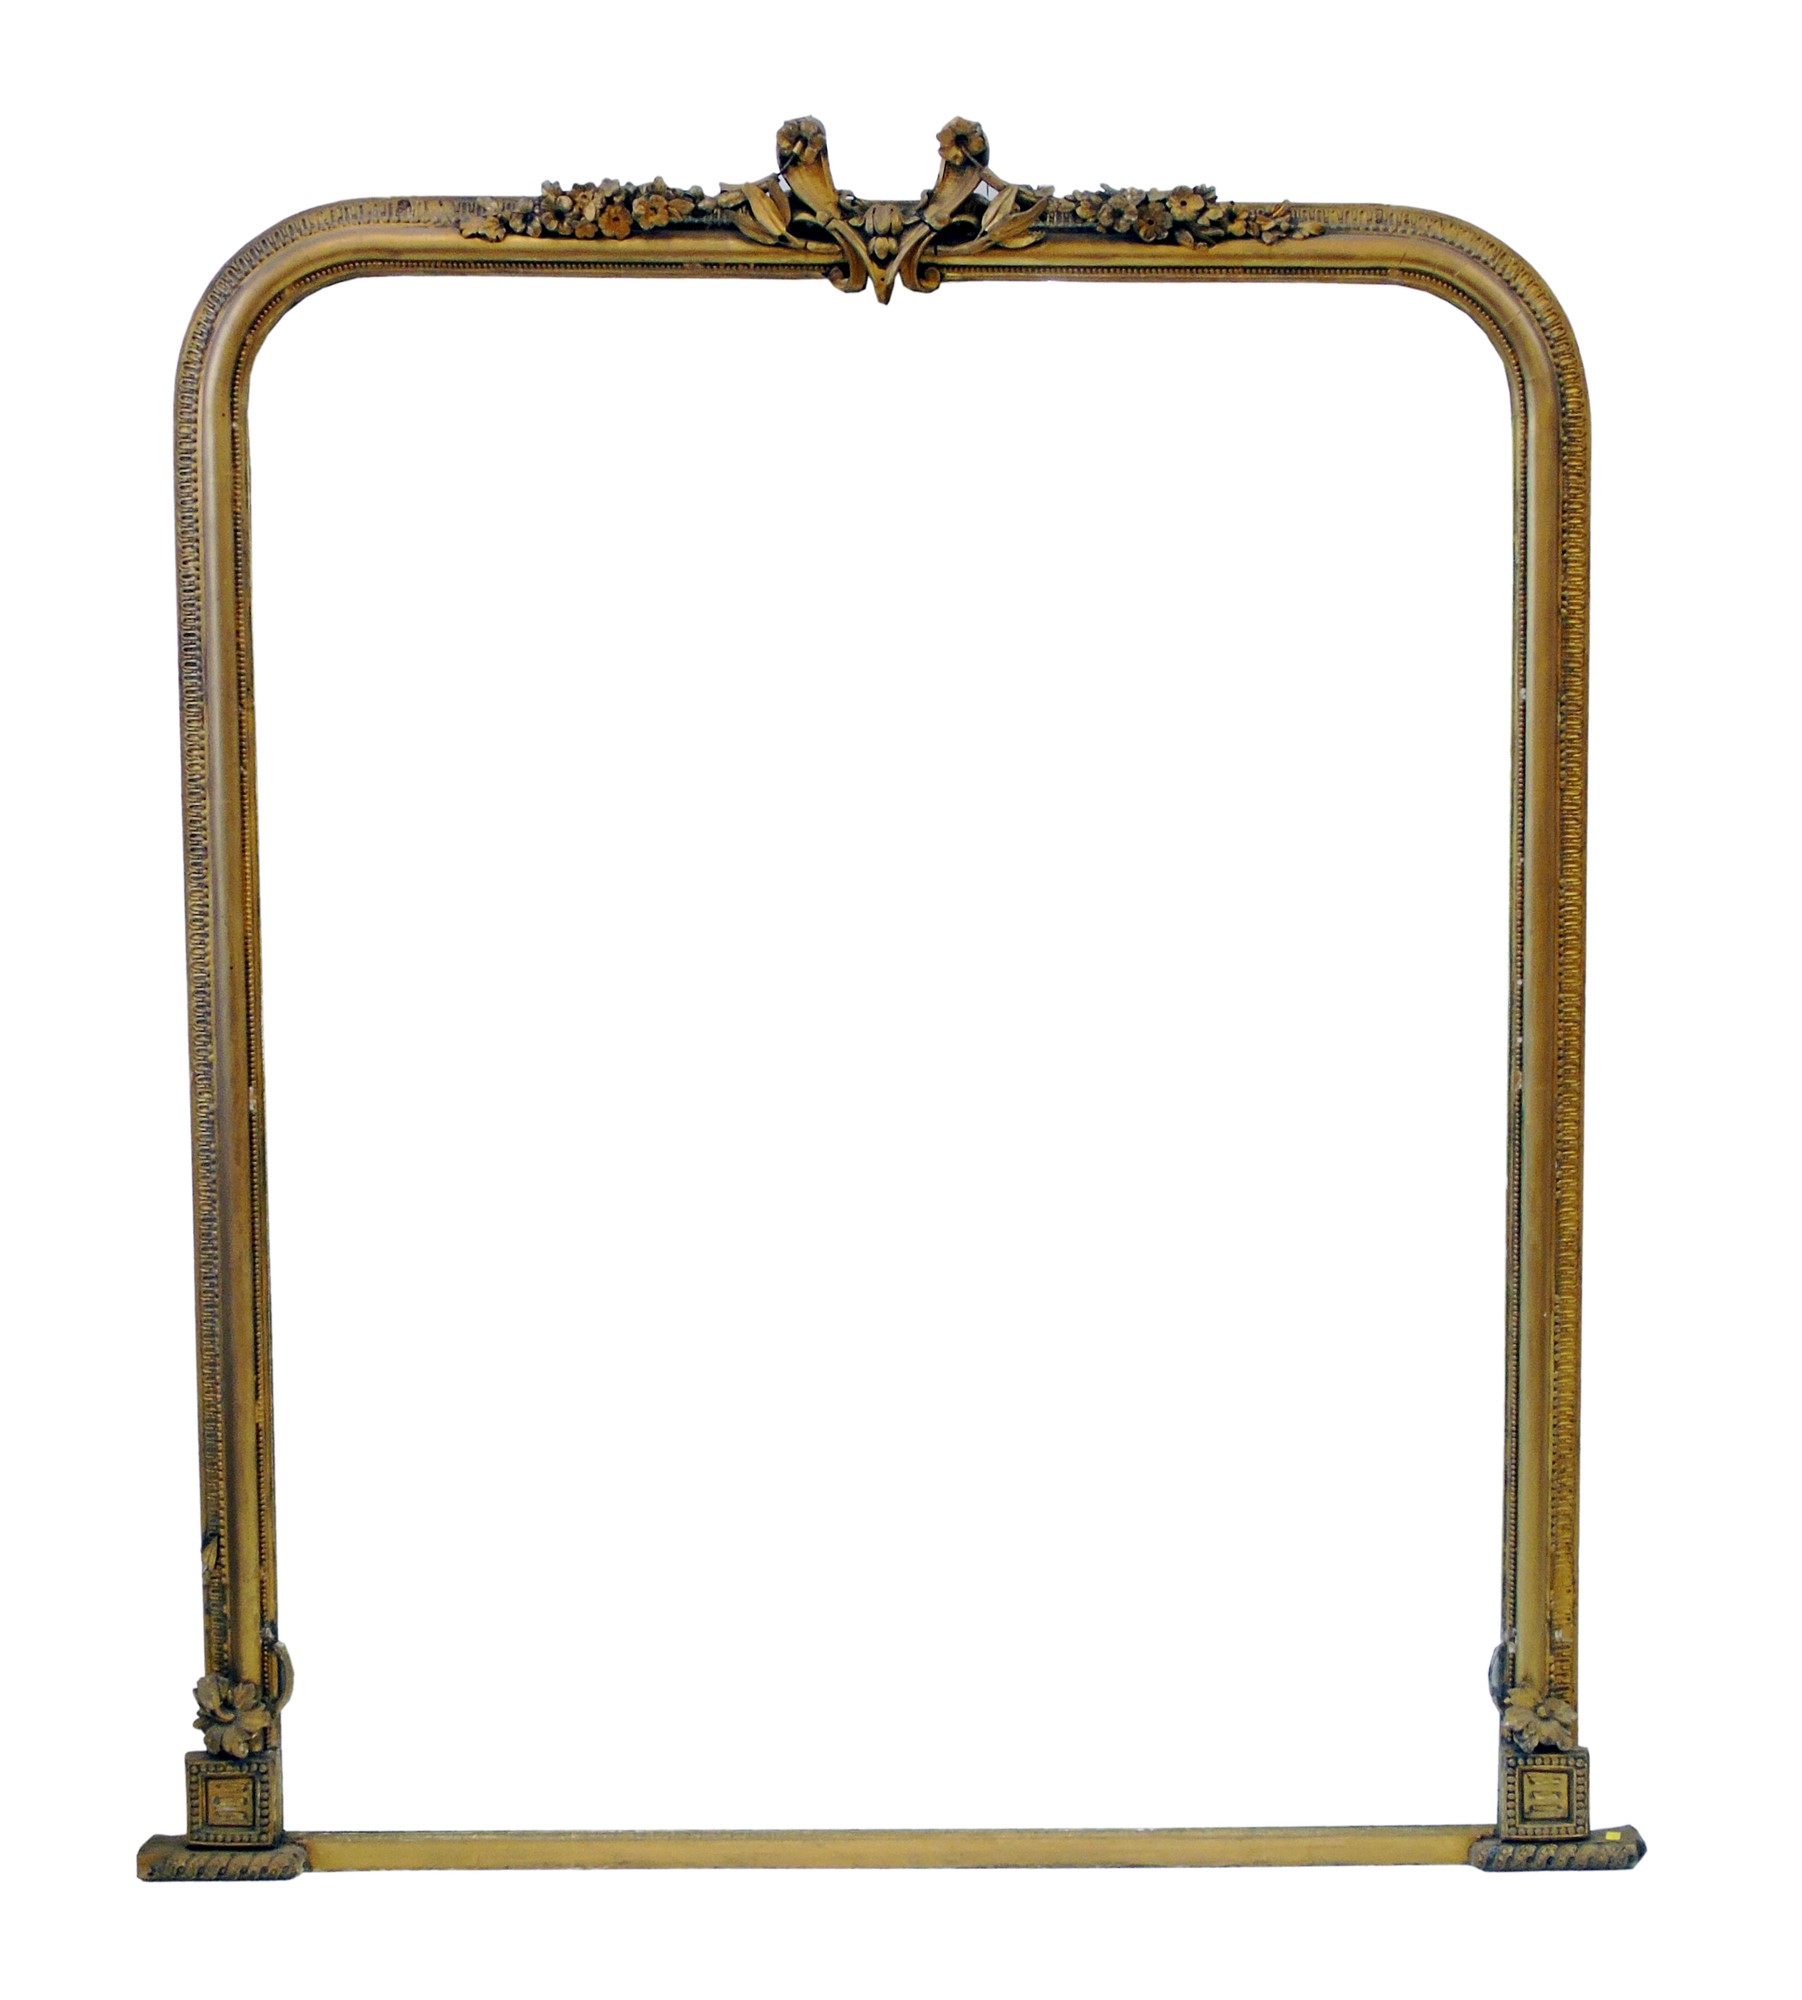 Late 19th century over mantel mirror, arched gesso frame with floral pediment containing original